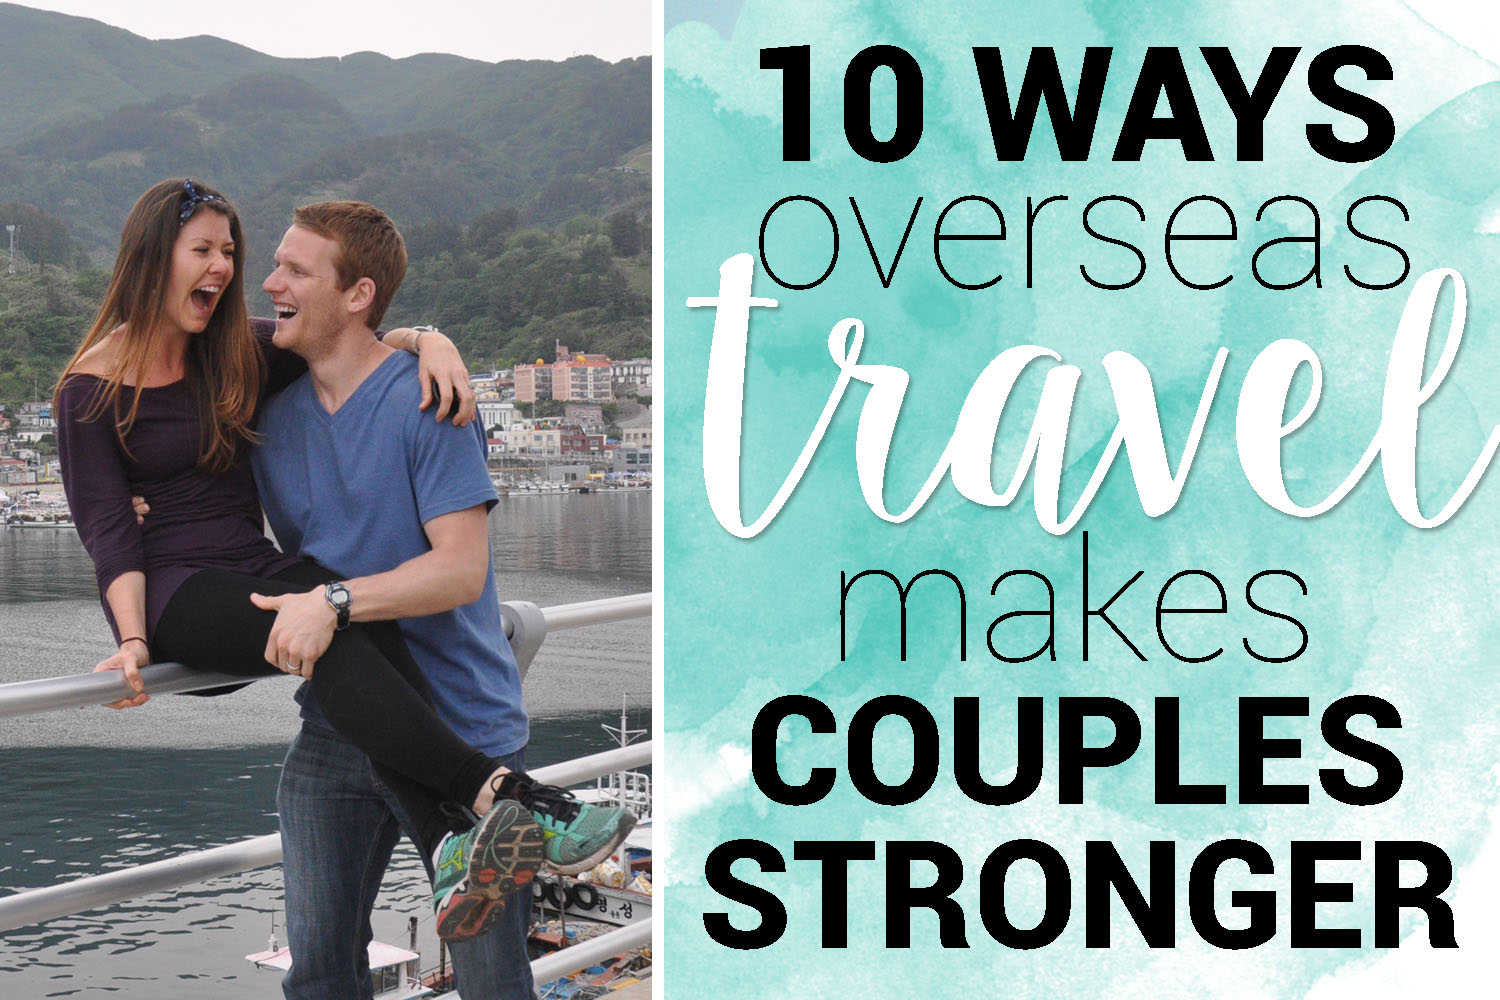 Overseas Travel Makes Couples Stronger